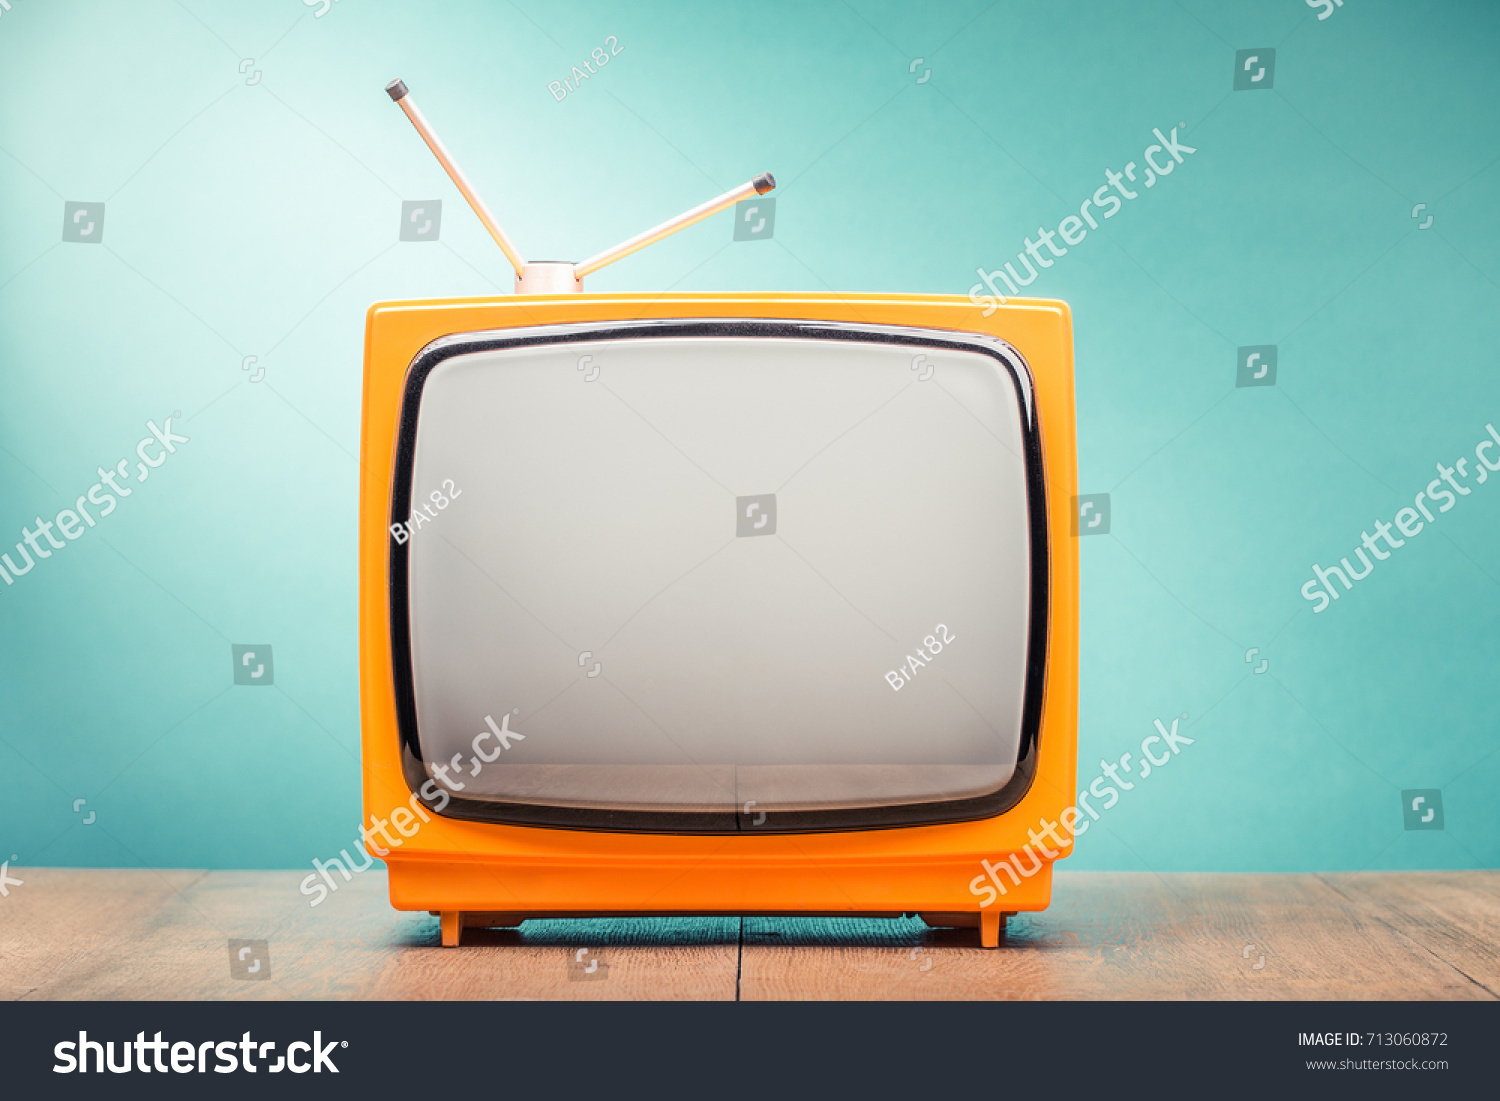 Retro old orange TV set receiver on wooden table front gradient mint green wall background. Vintage instagram style filtered photo #713060872